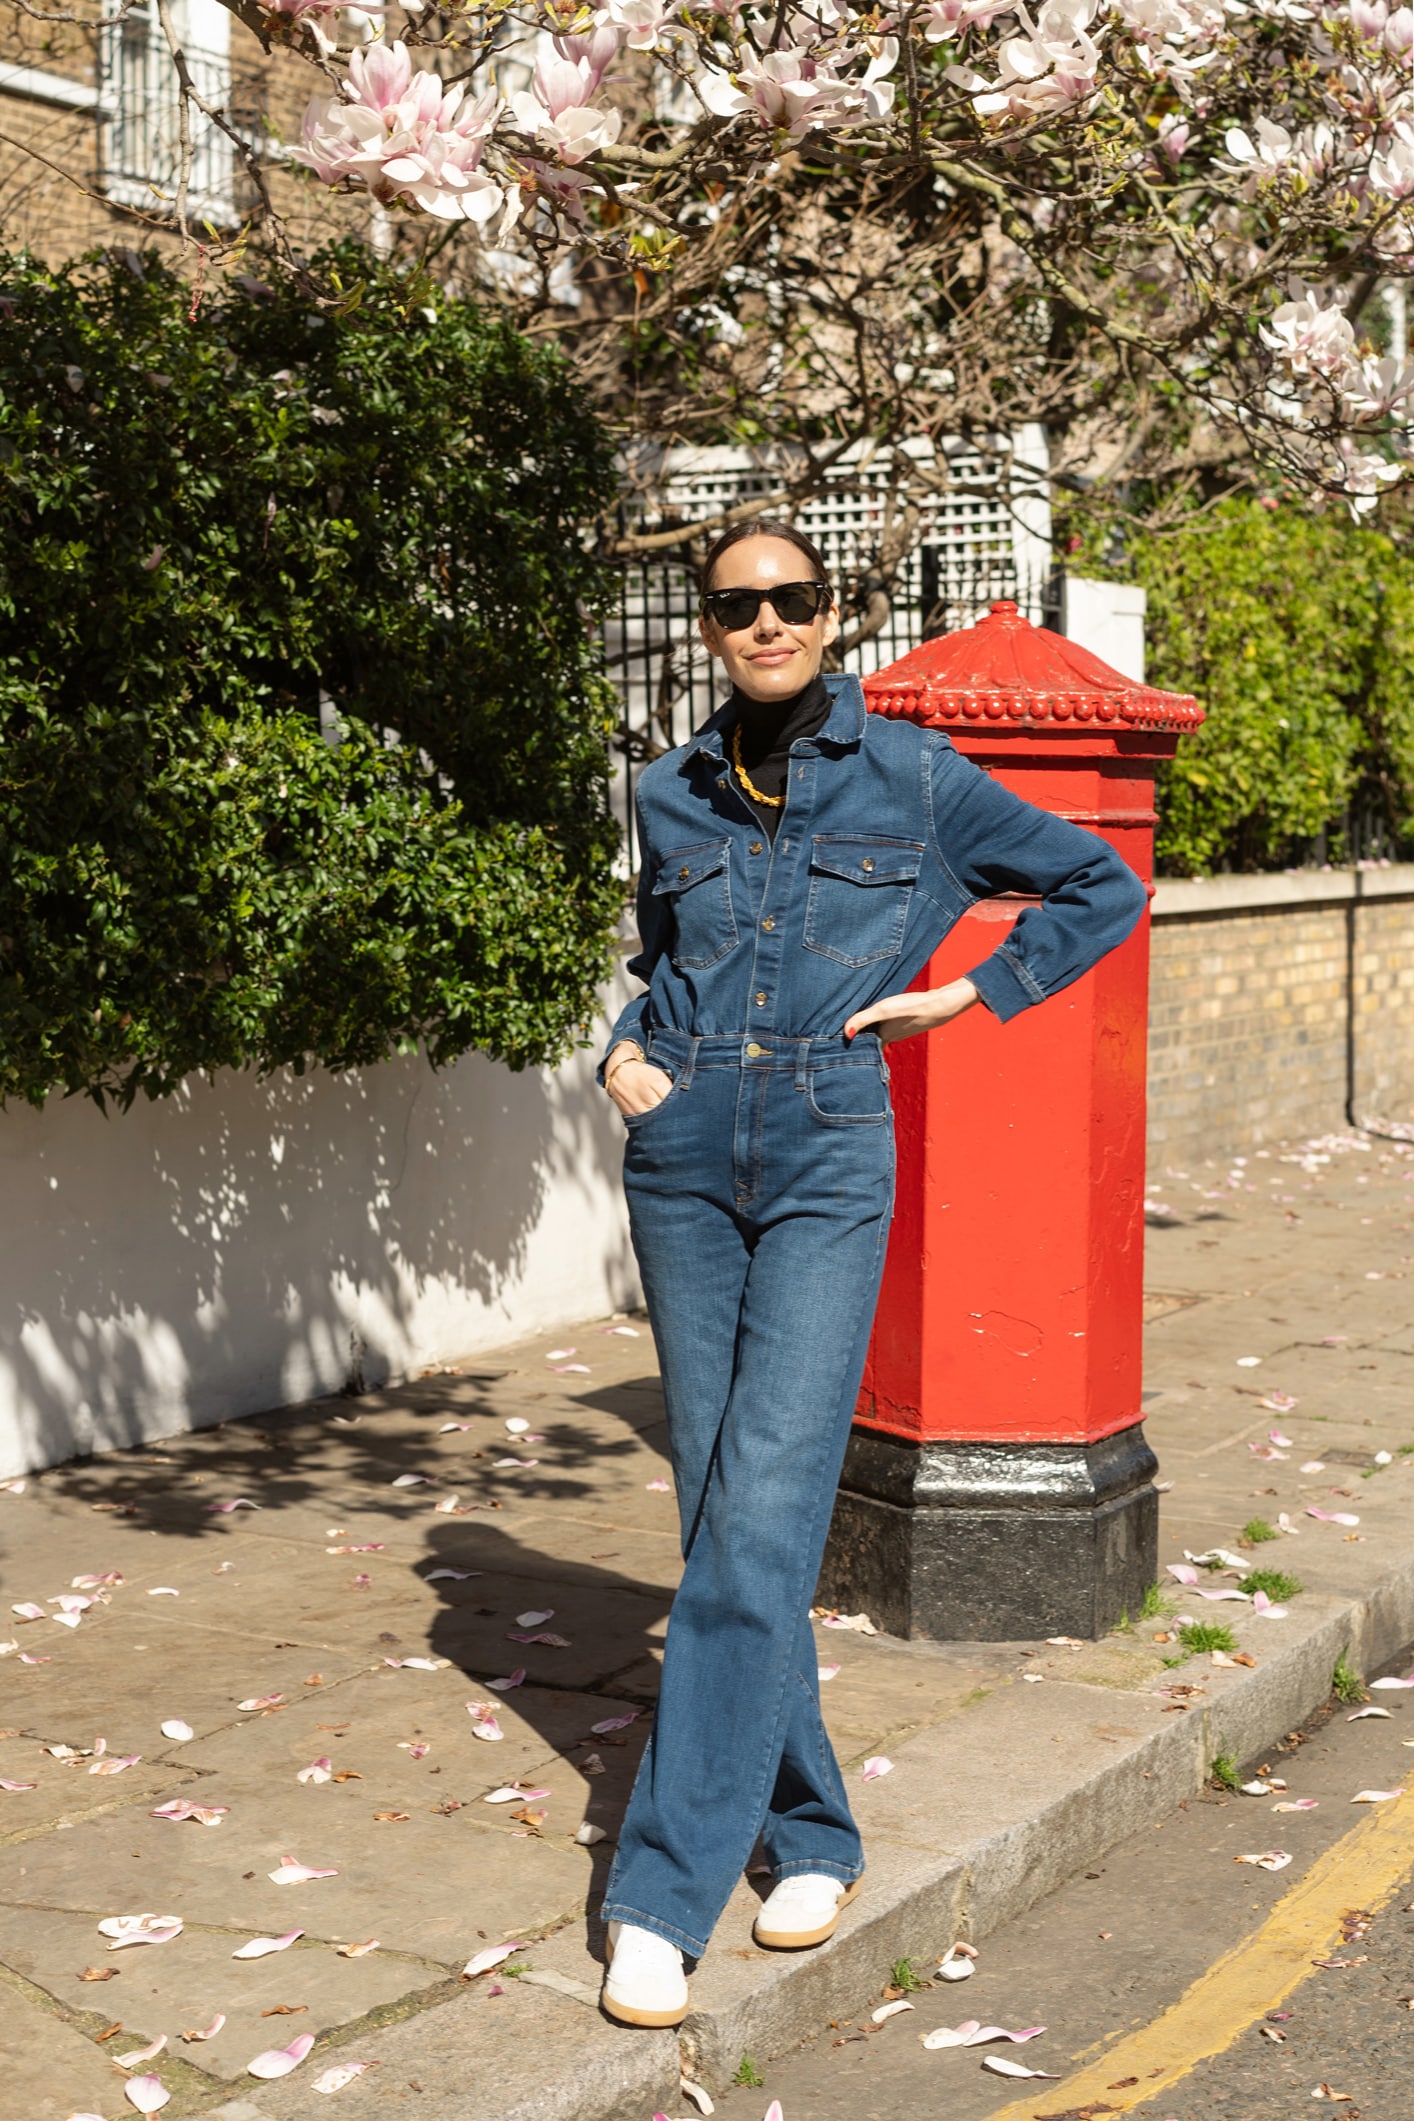 Louise-Roe-of-Front-Roe-Timeless-Denim-Overalls